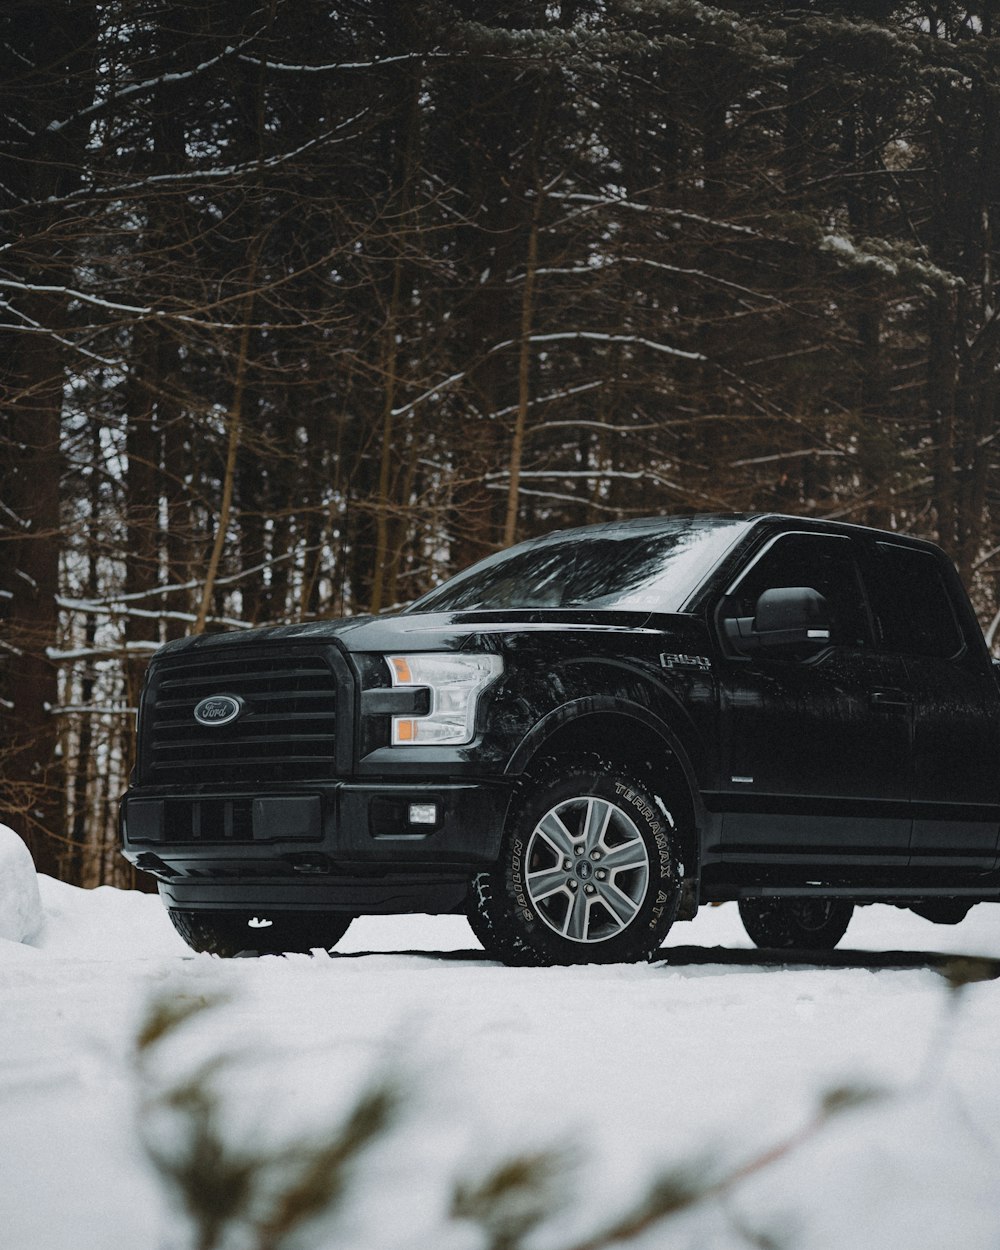 black crew cab pickup truck on snow covered ground